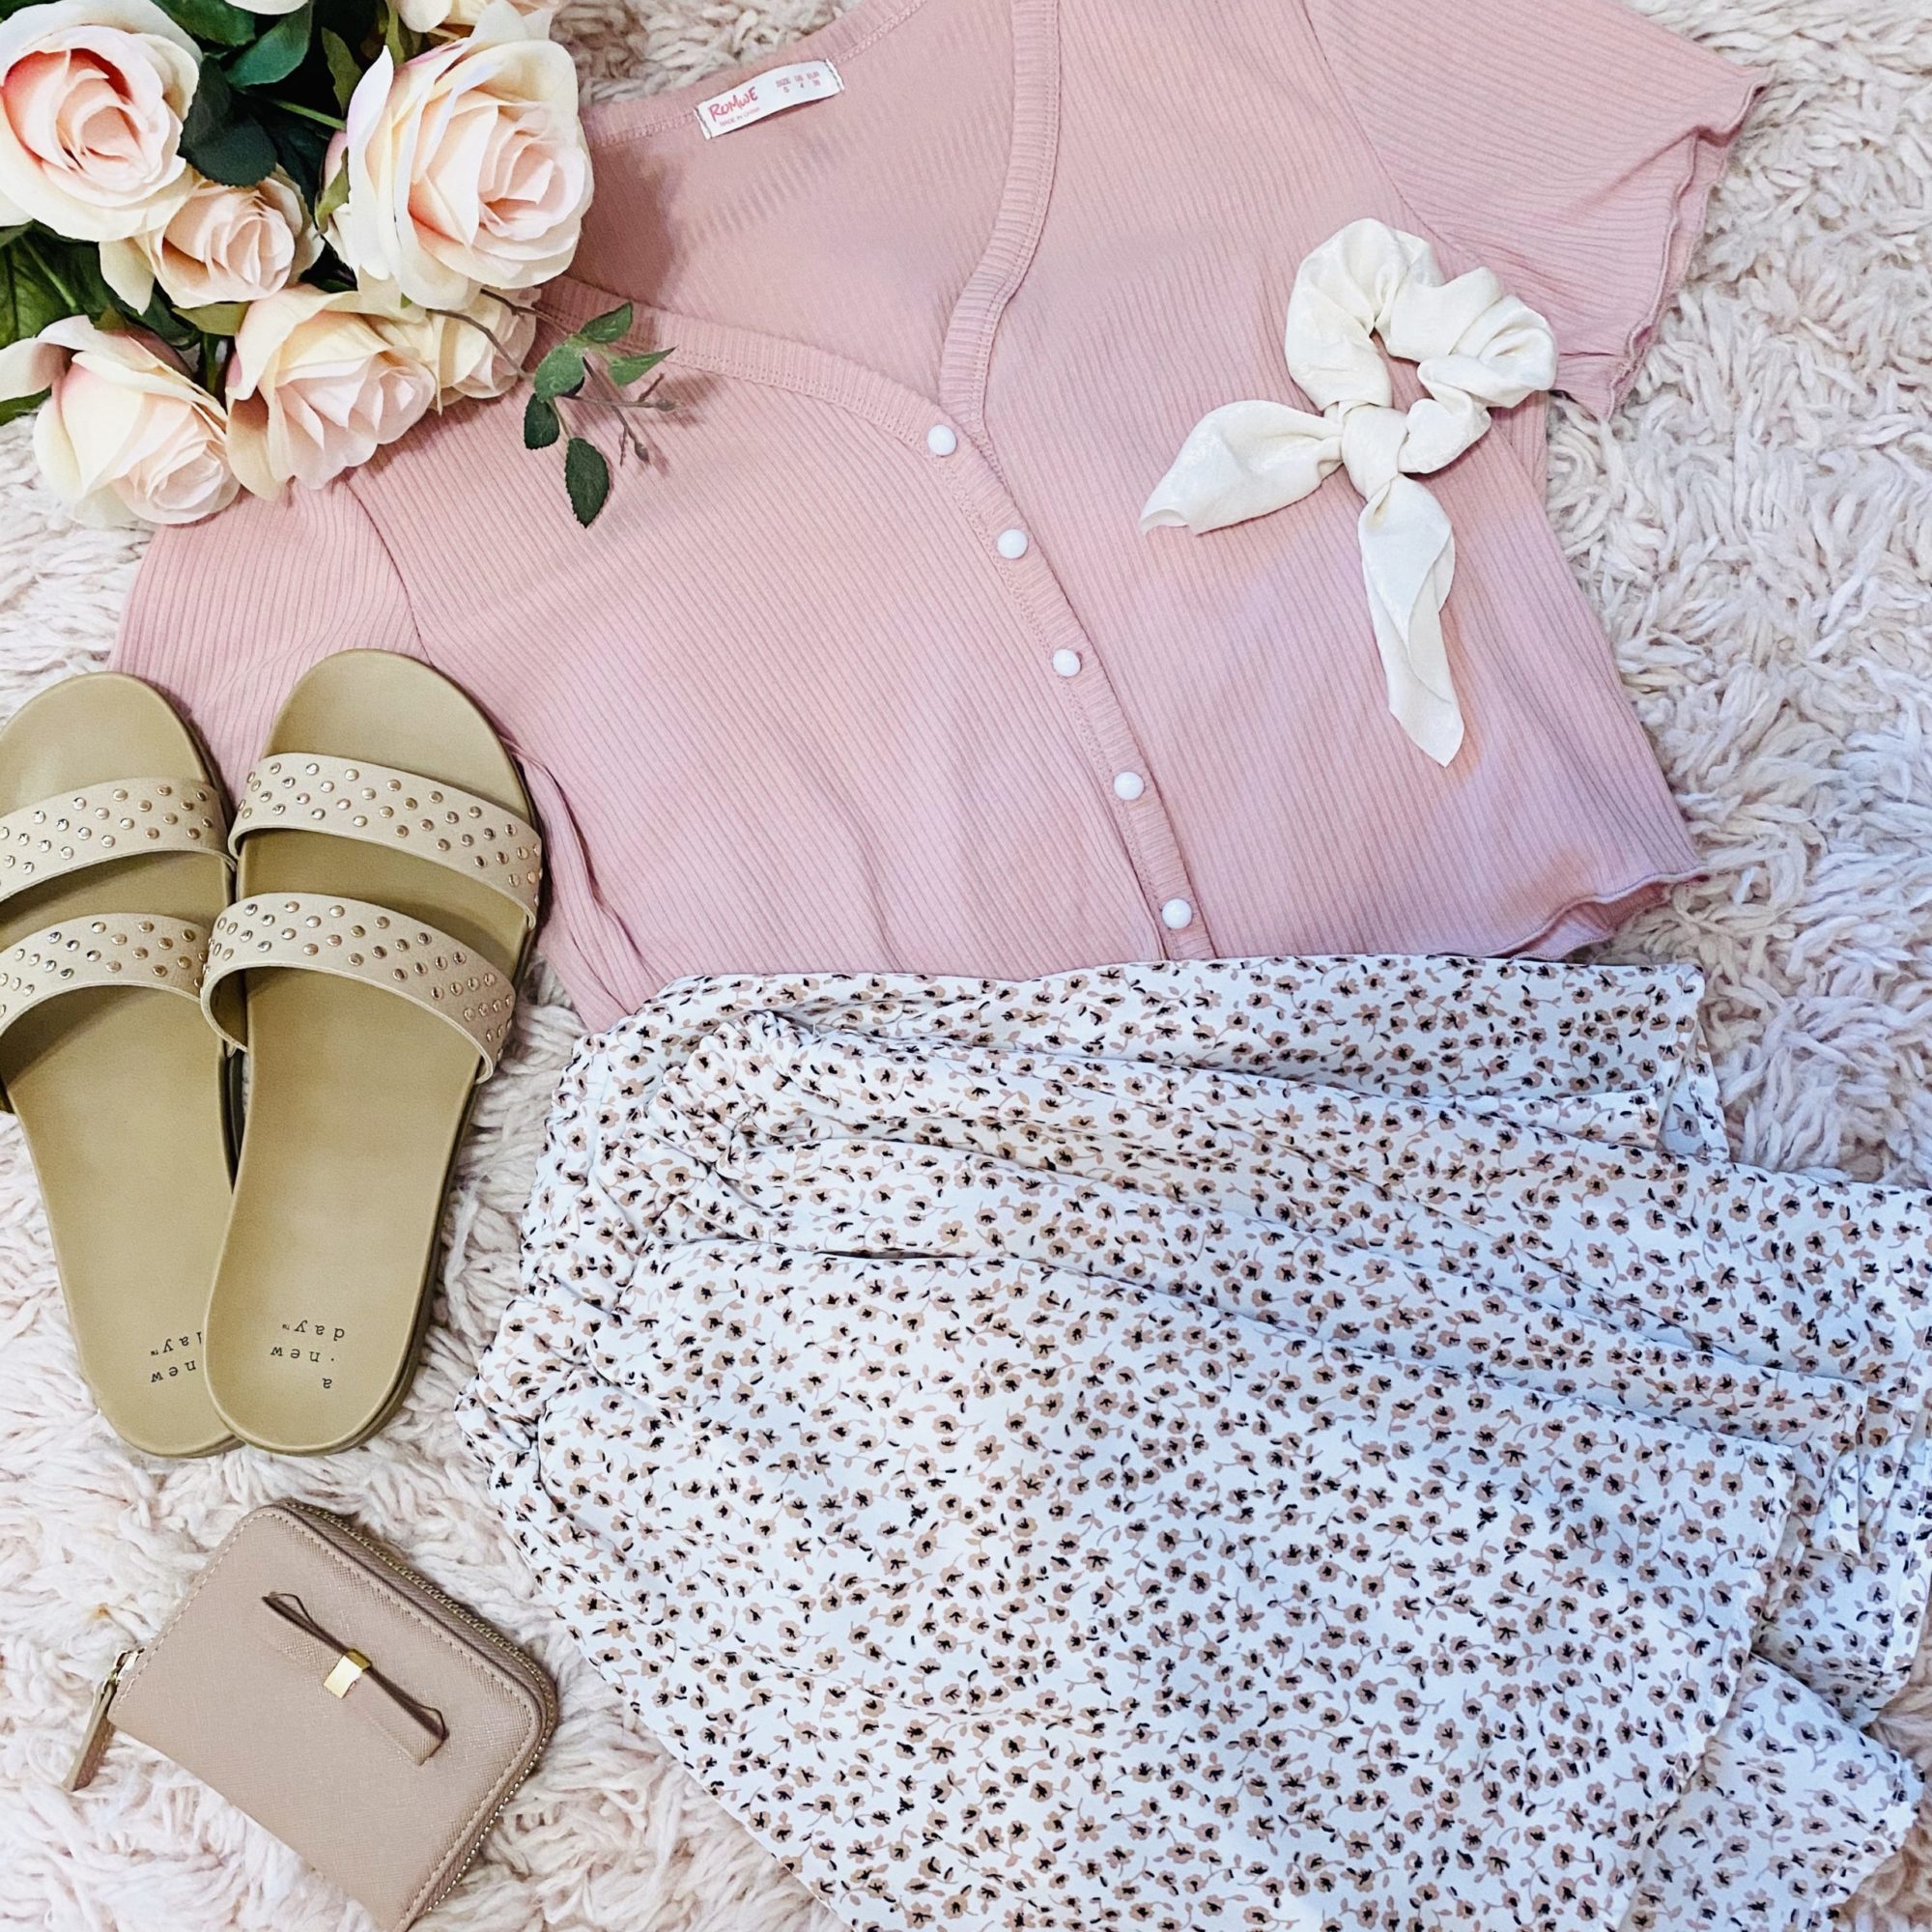 pink floral skirt outfit ideas | girly and pink fashion blog | sequins & satin